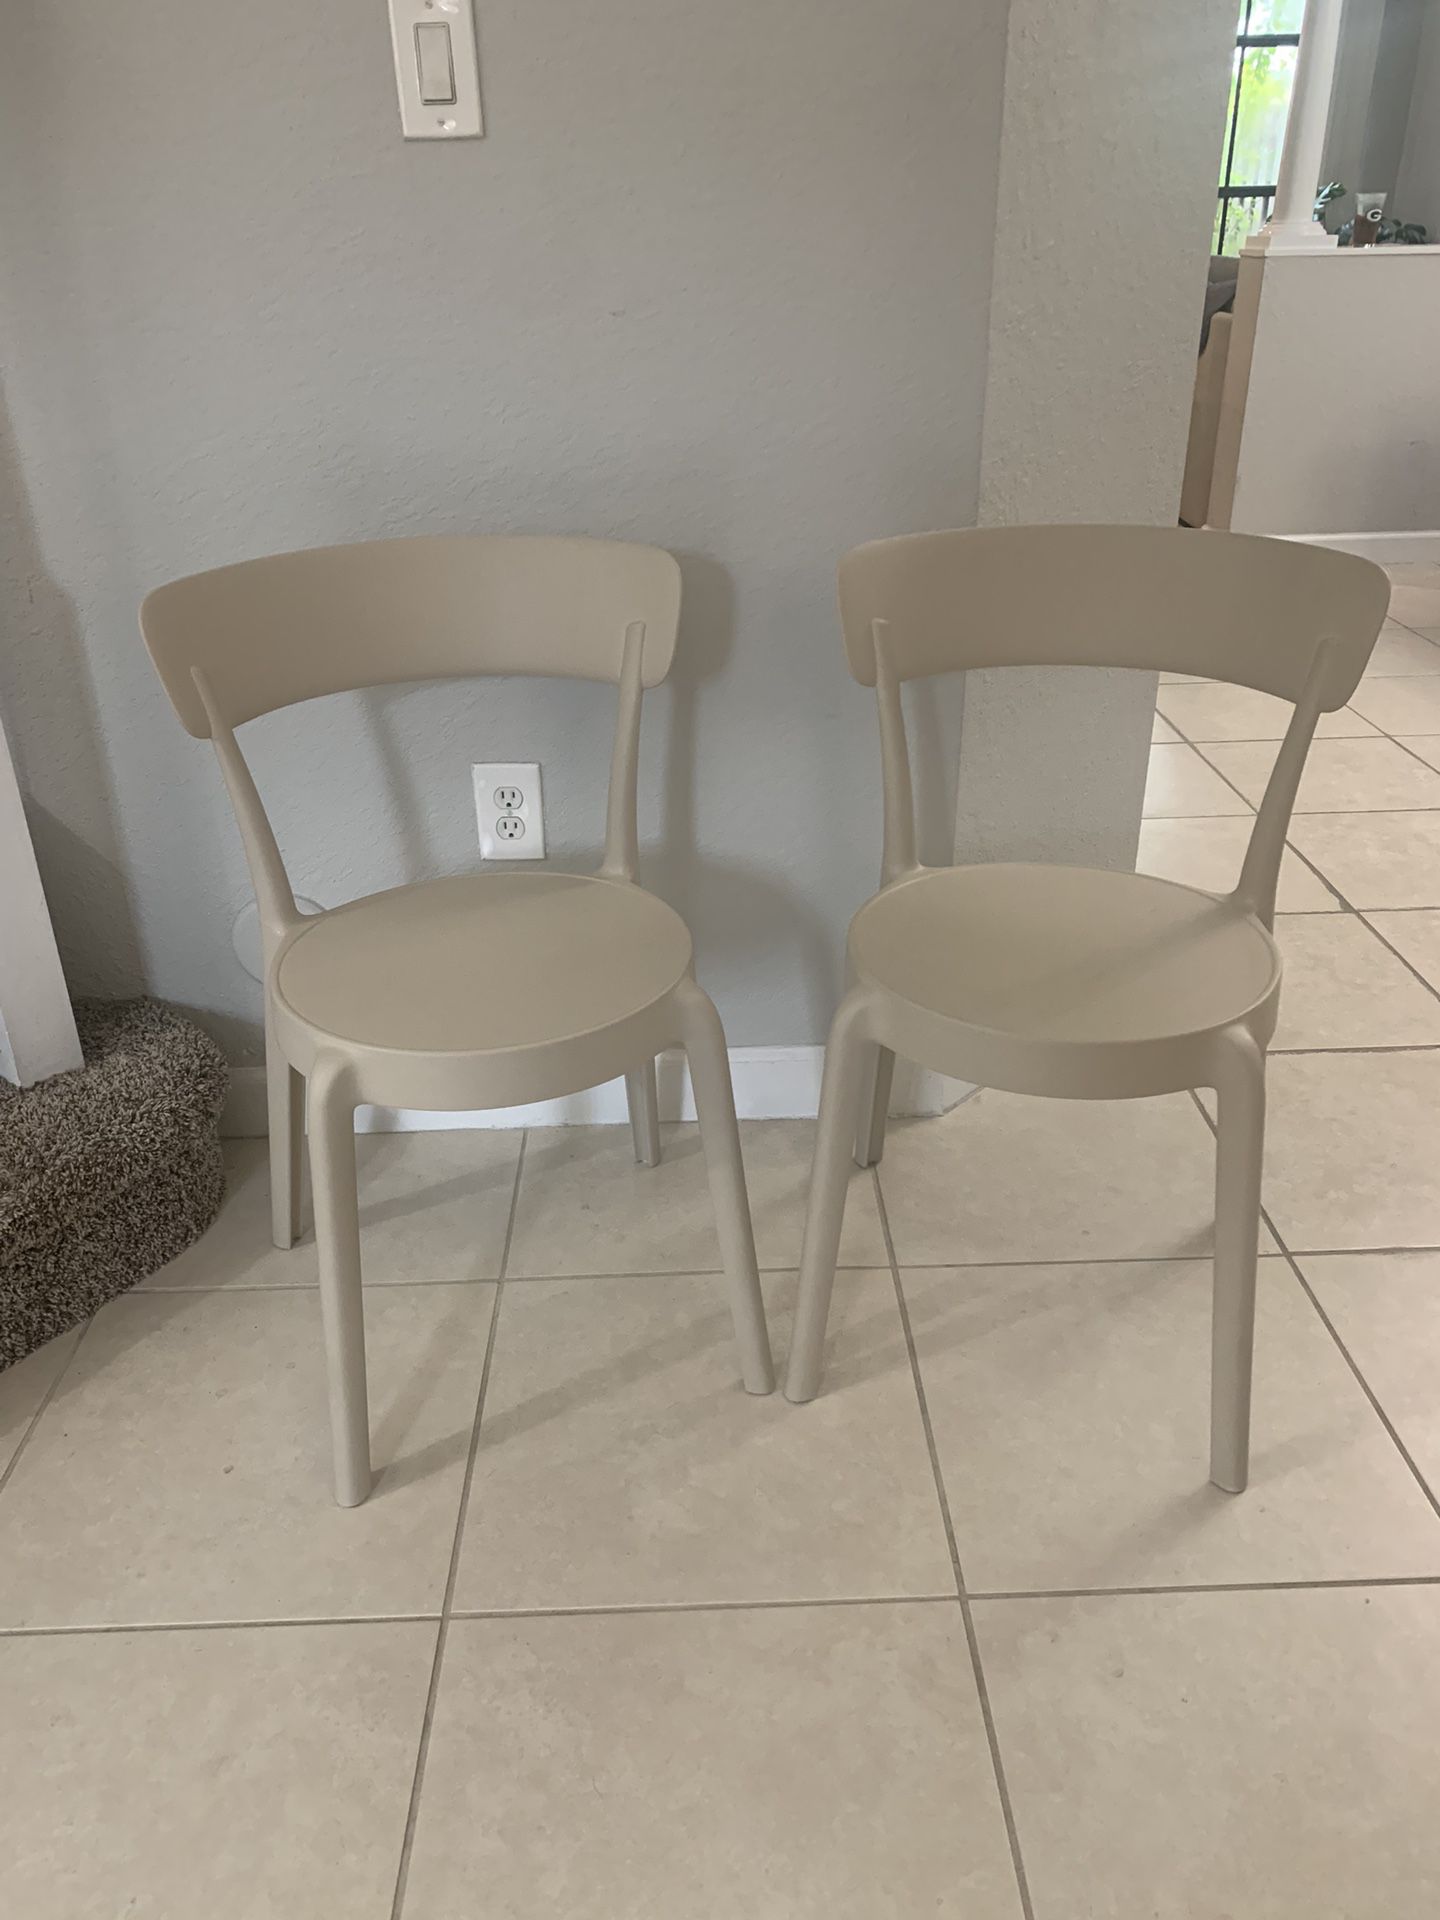 Chairs Set of 2